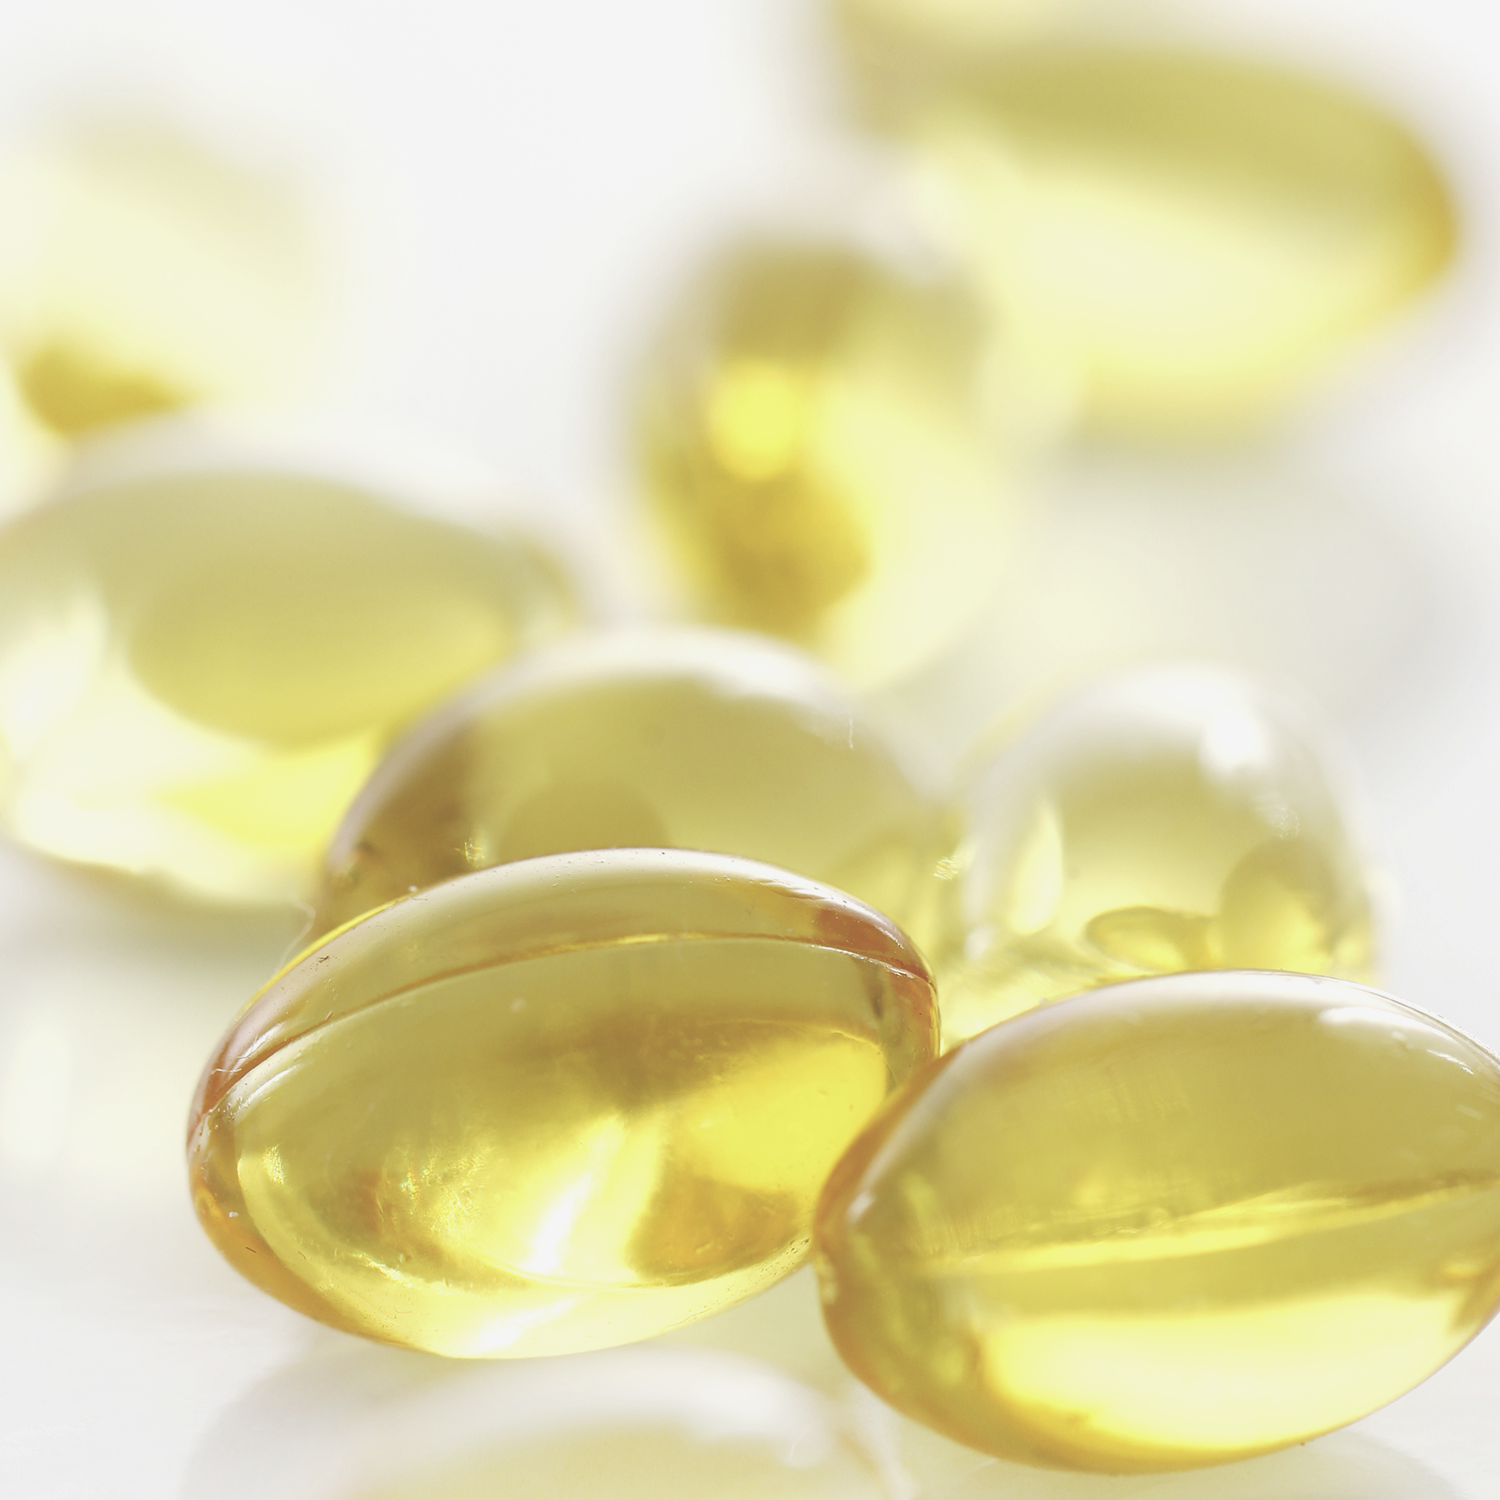 Why food supplements?